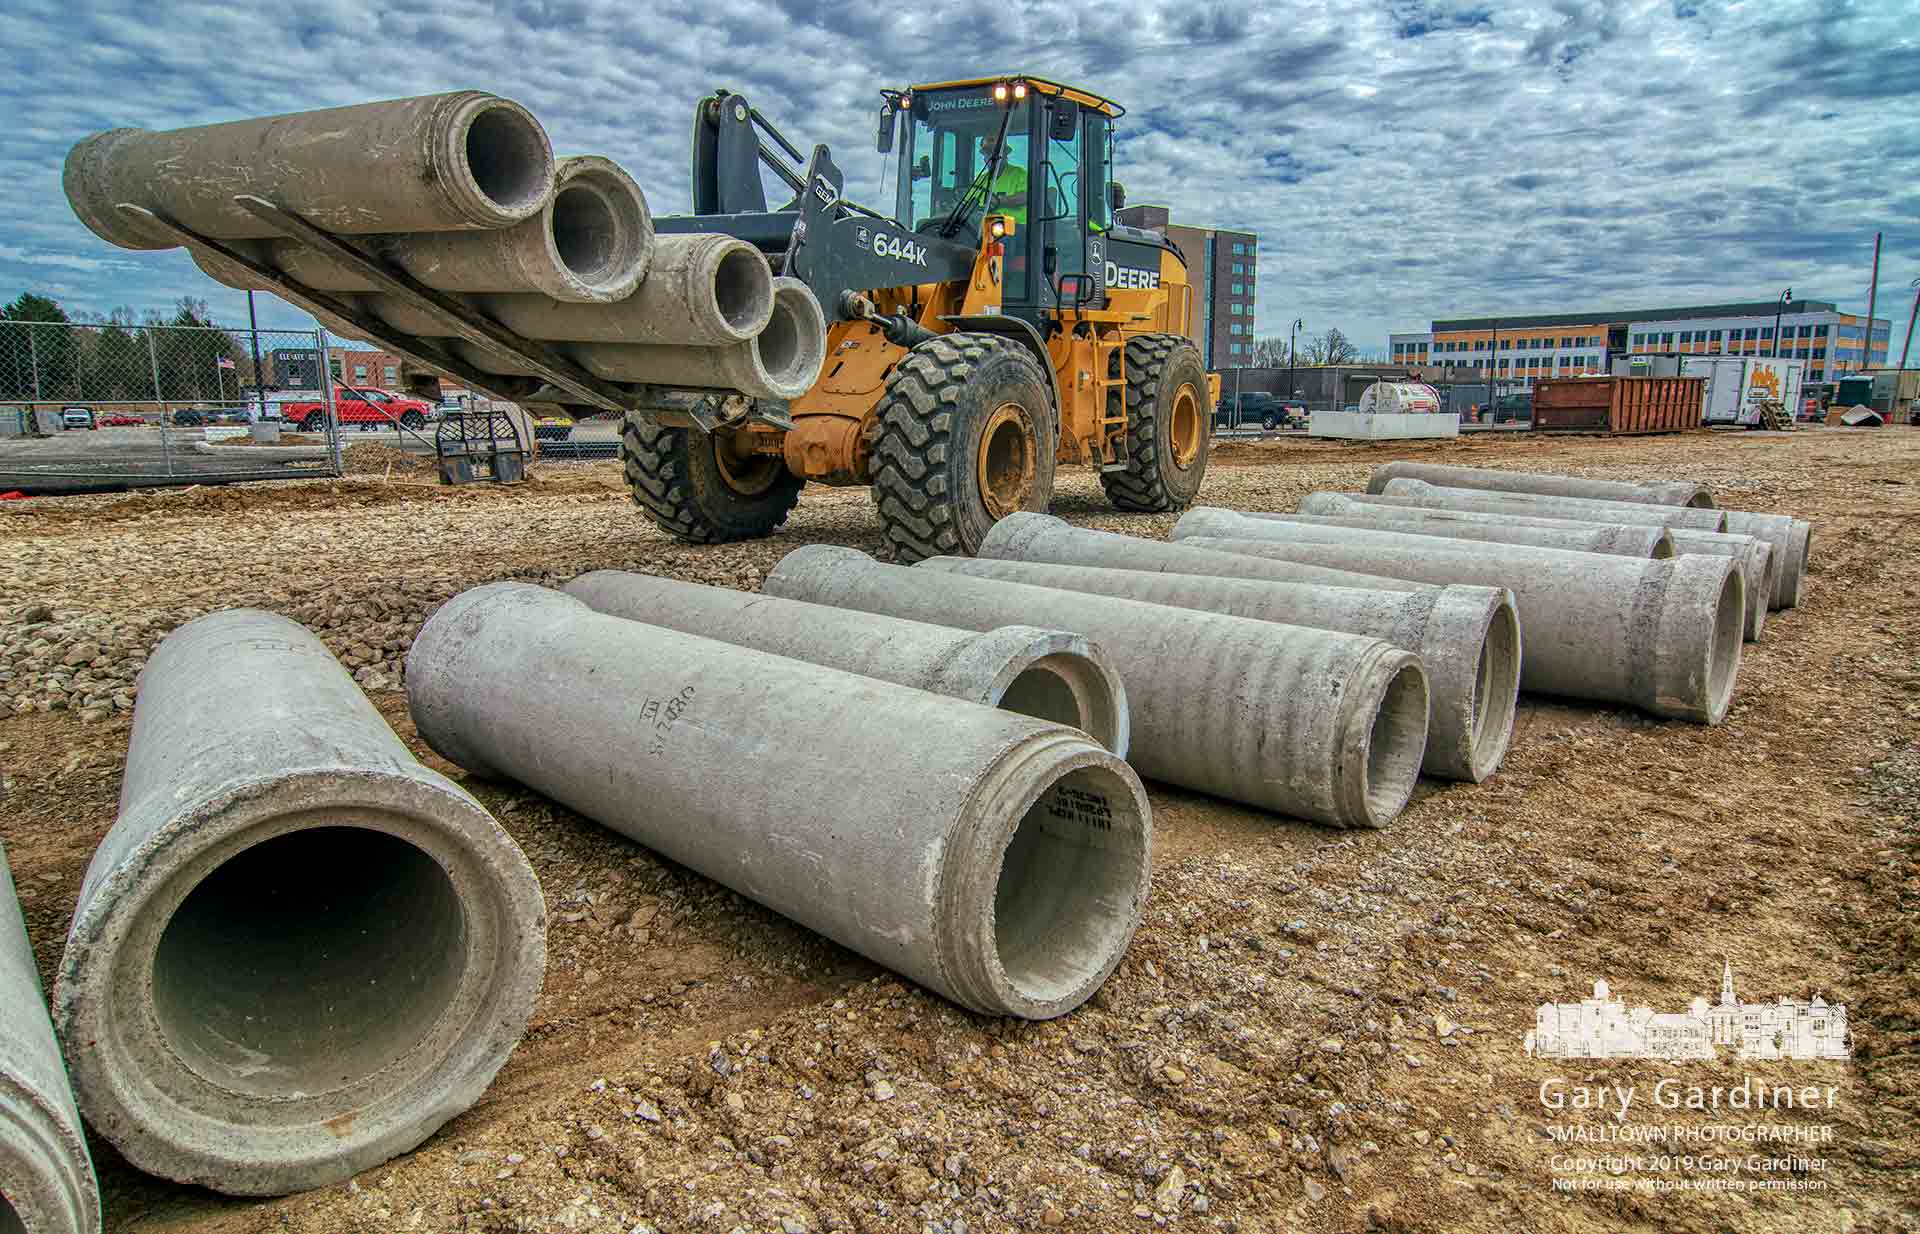 Preparing For The Storm - Storm sewer pipes destined for two new roads in the Westar development are moved along one of the new roadways Wednesday afternoon. My Final Photo for April 10, 2019.